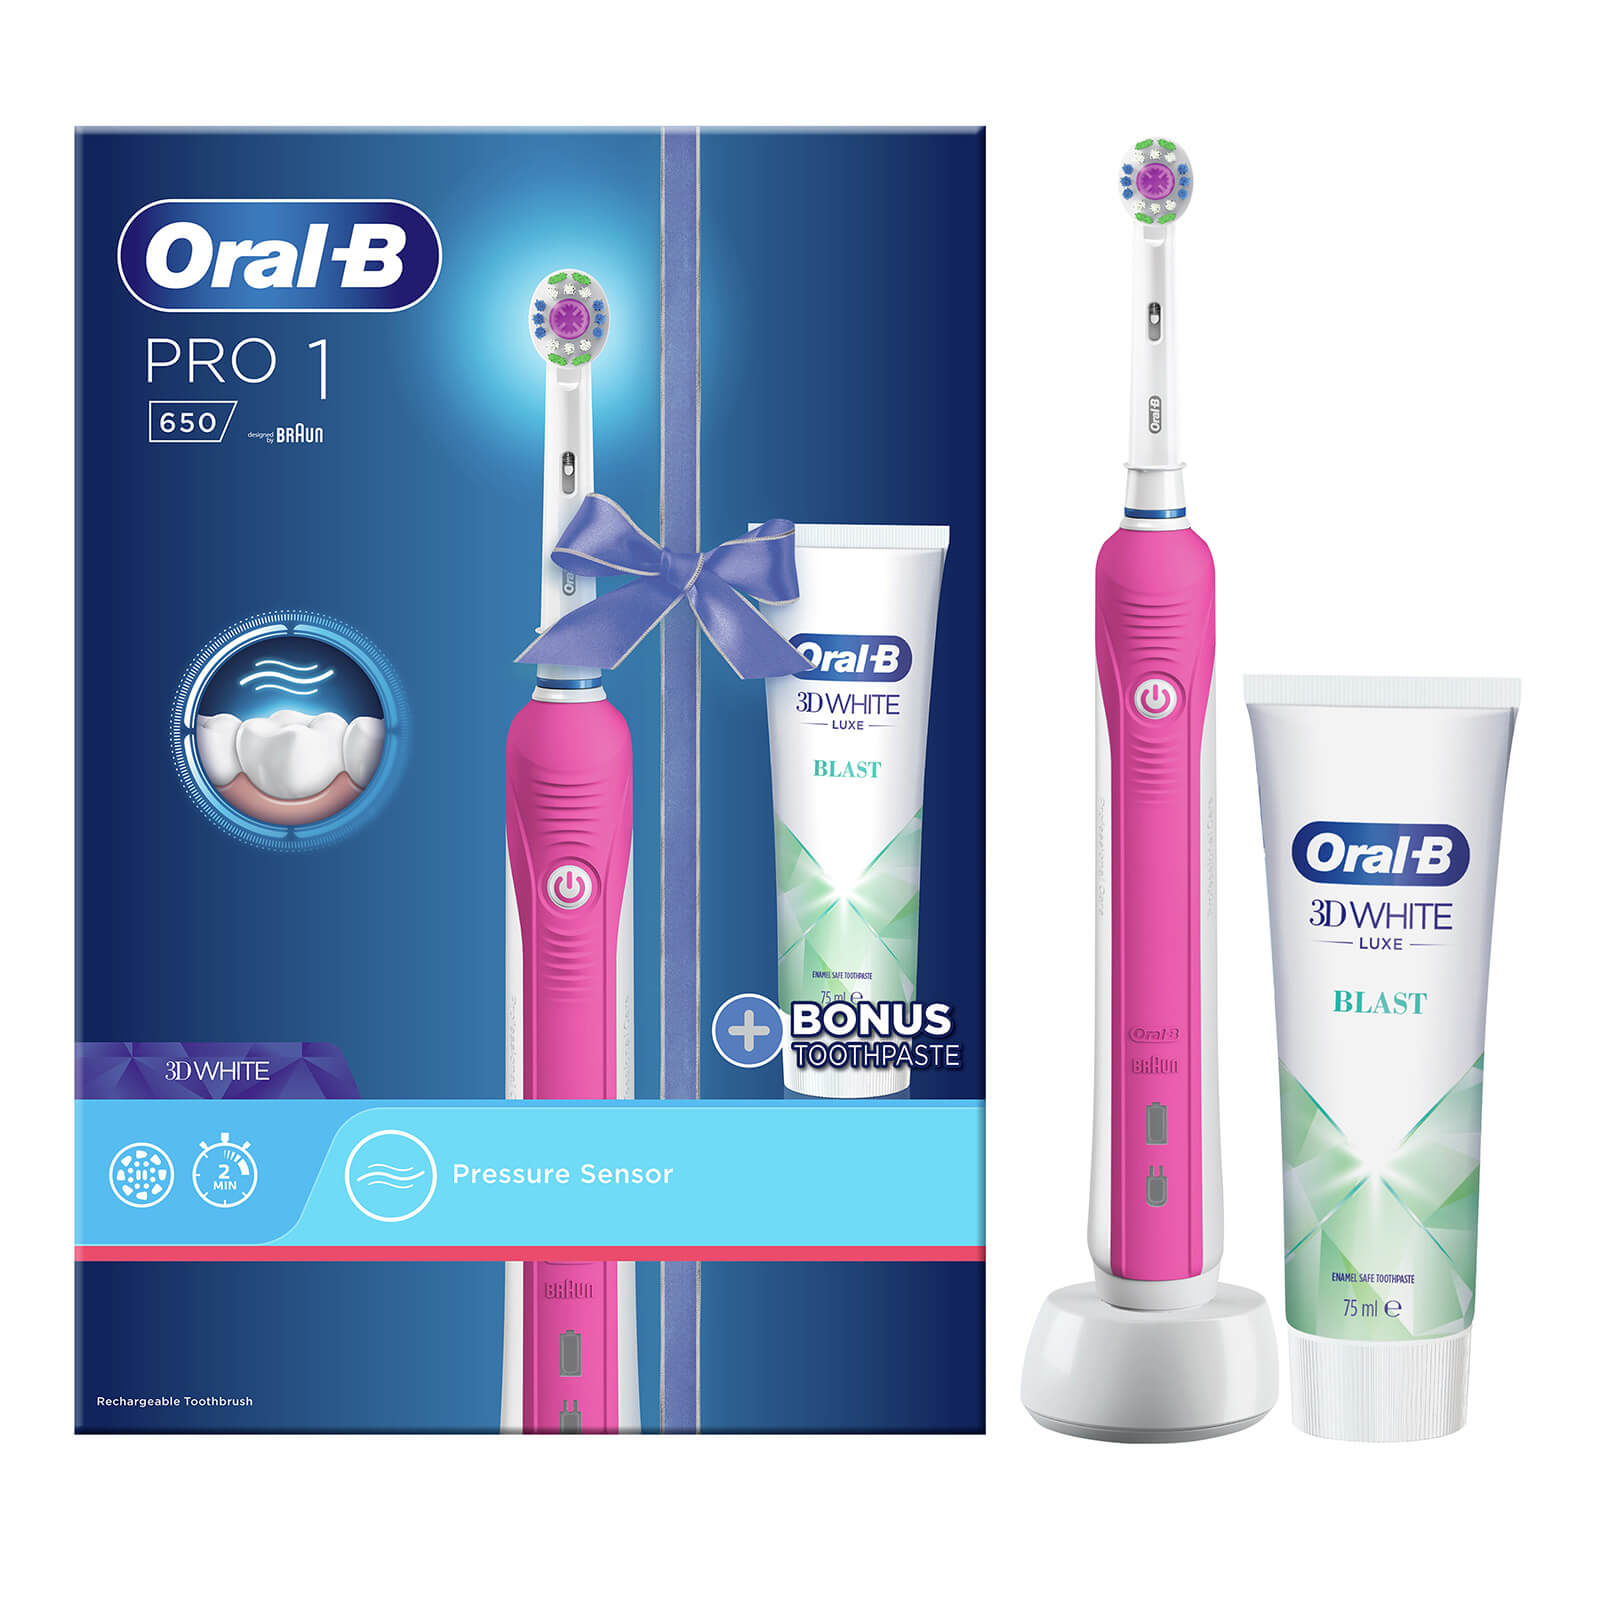 Oral-B Pro 1 650 Electric Toothbrush and Toothpaste – Pink lookfantastic.com imagine